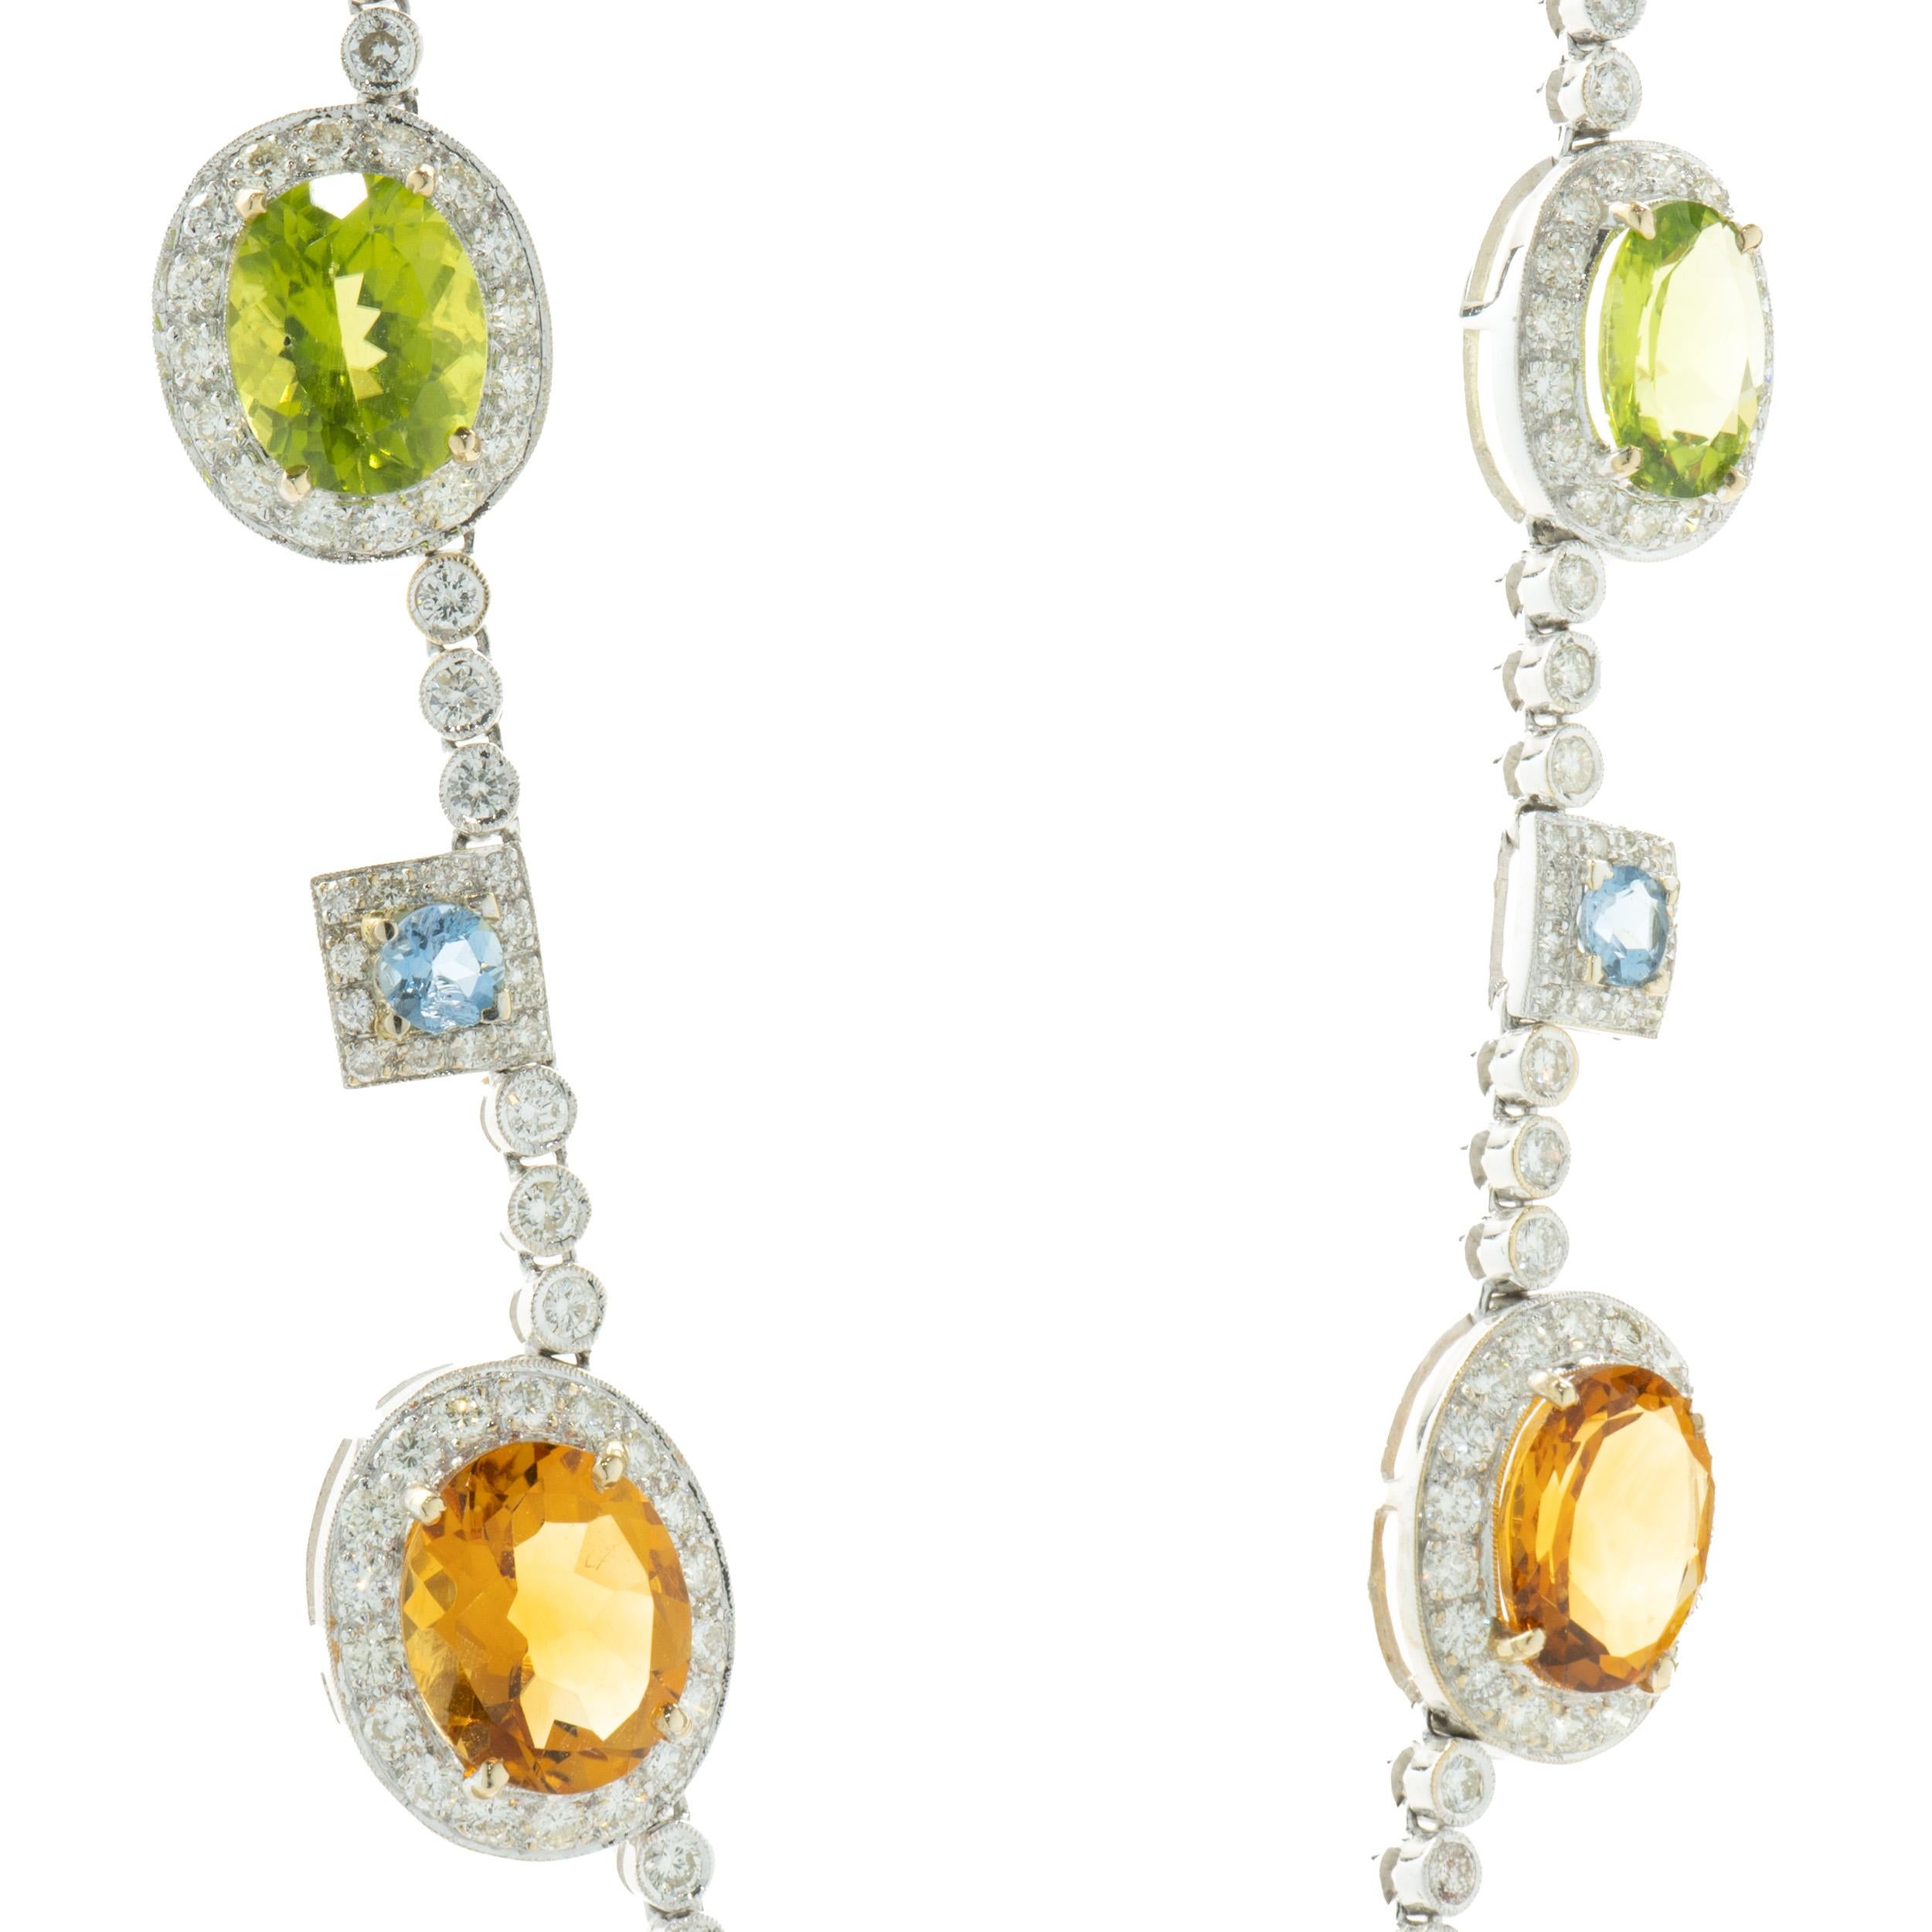 18 Karat White Gold Peridot, Citrine, Blue Topaz, and Diamond Drop Necklace In Excellent Condition For Sale In Scottsdale, AZ